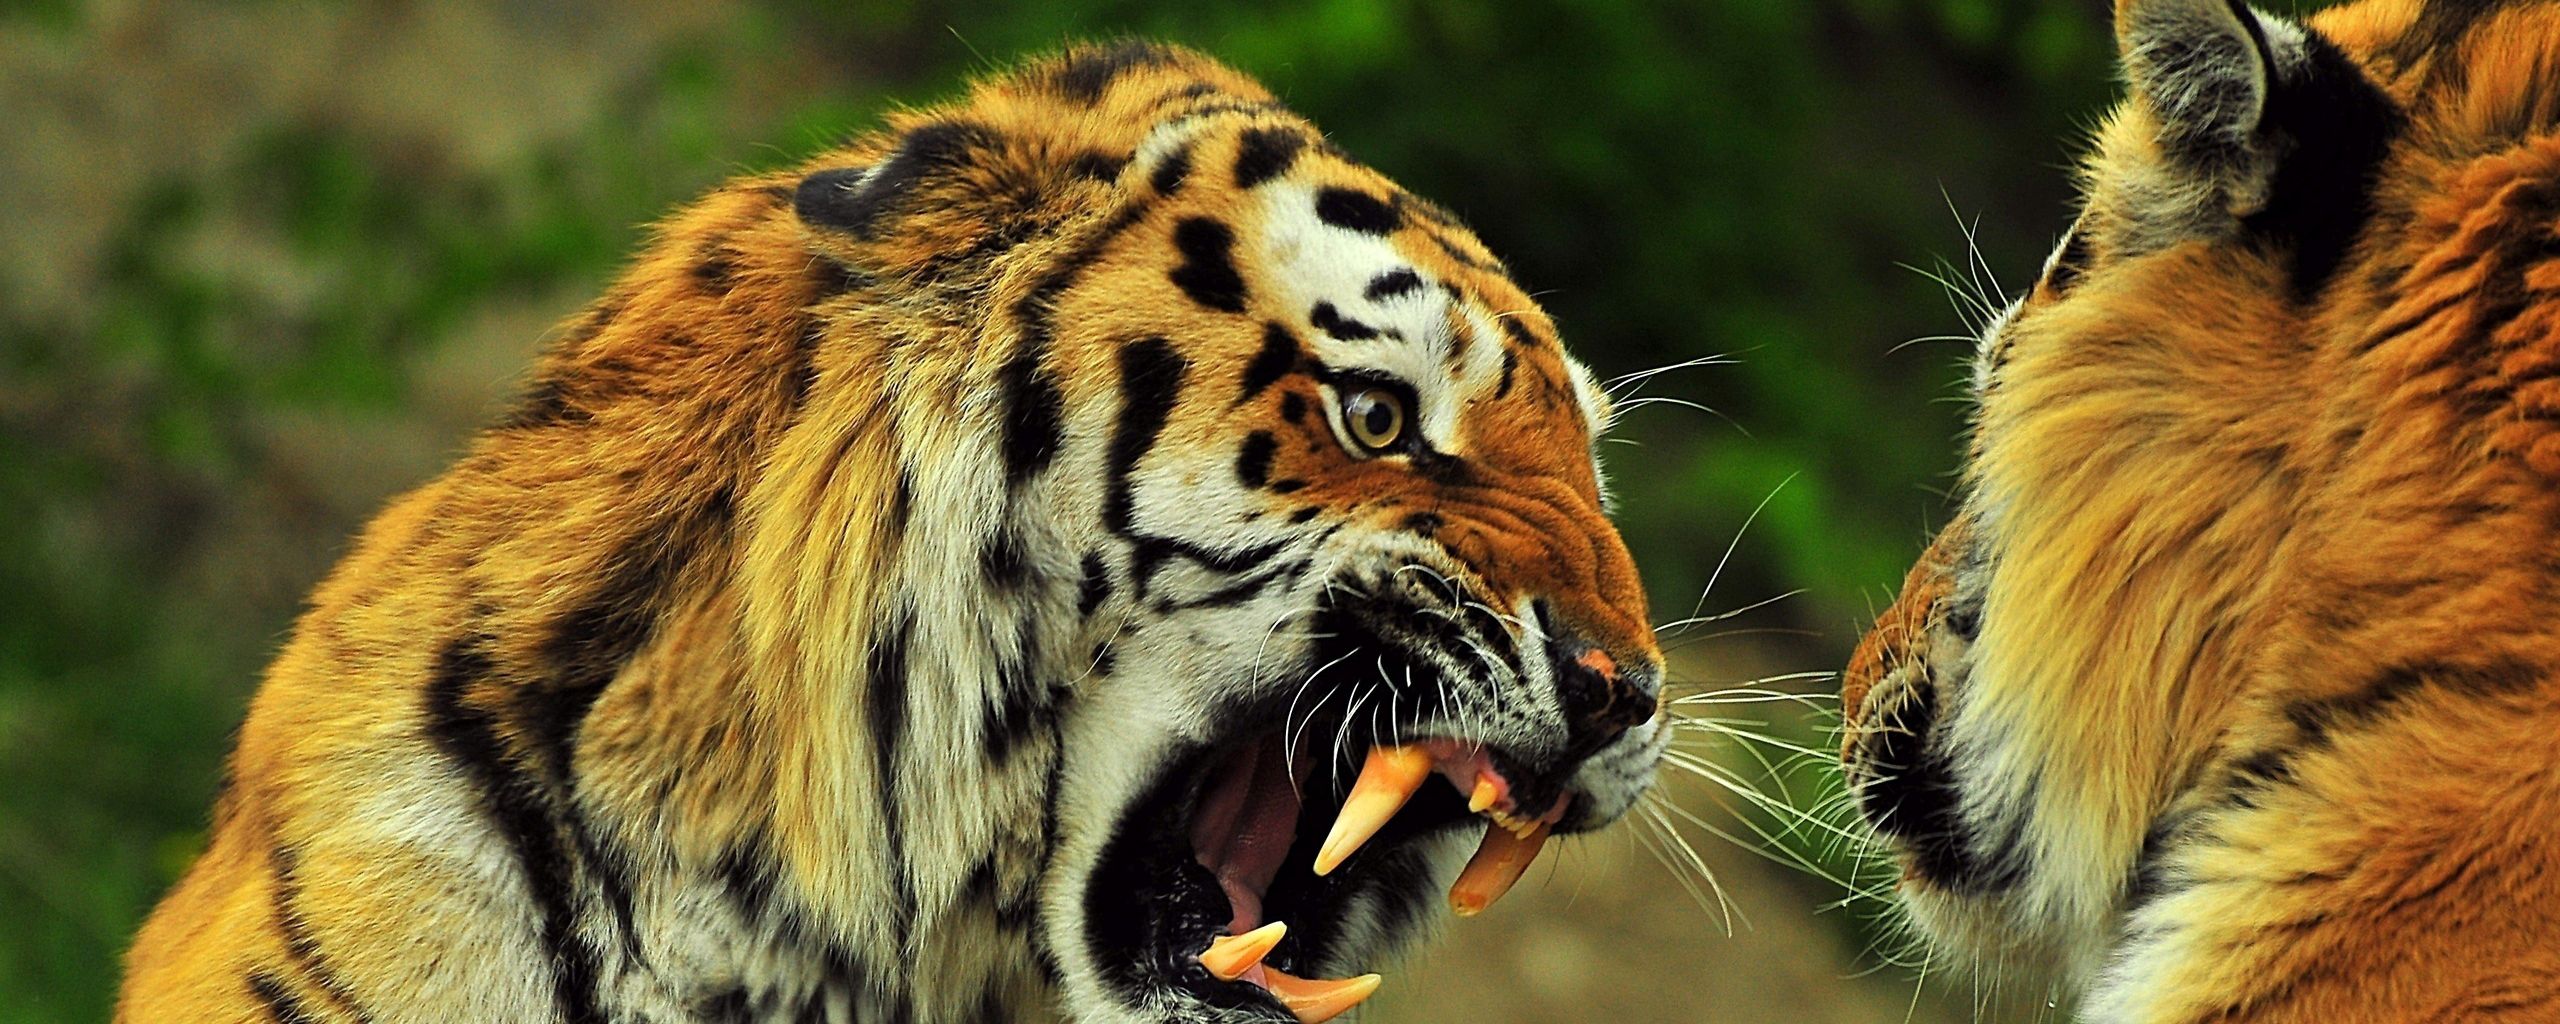 2560x1024 Wallpaper tigers, couple, fight, battle, teeth, anger